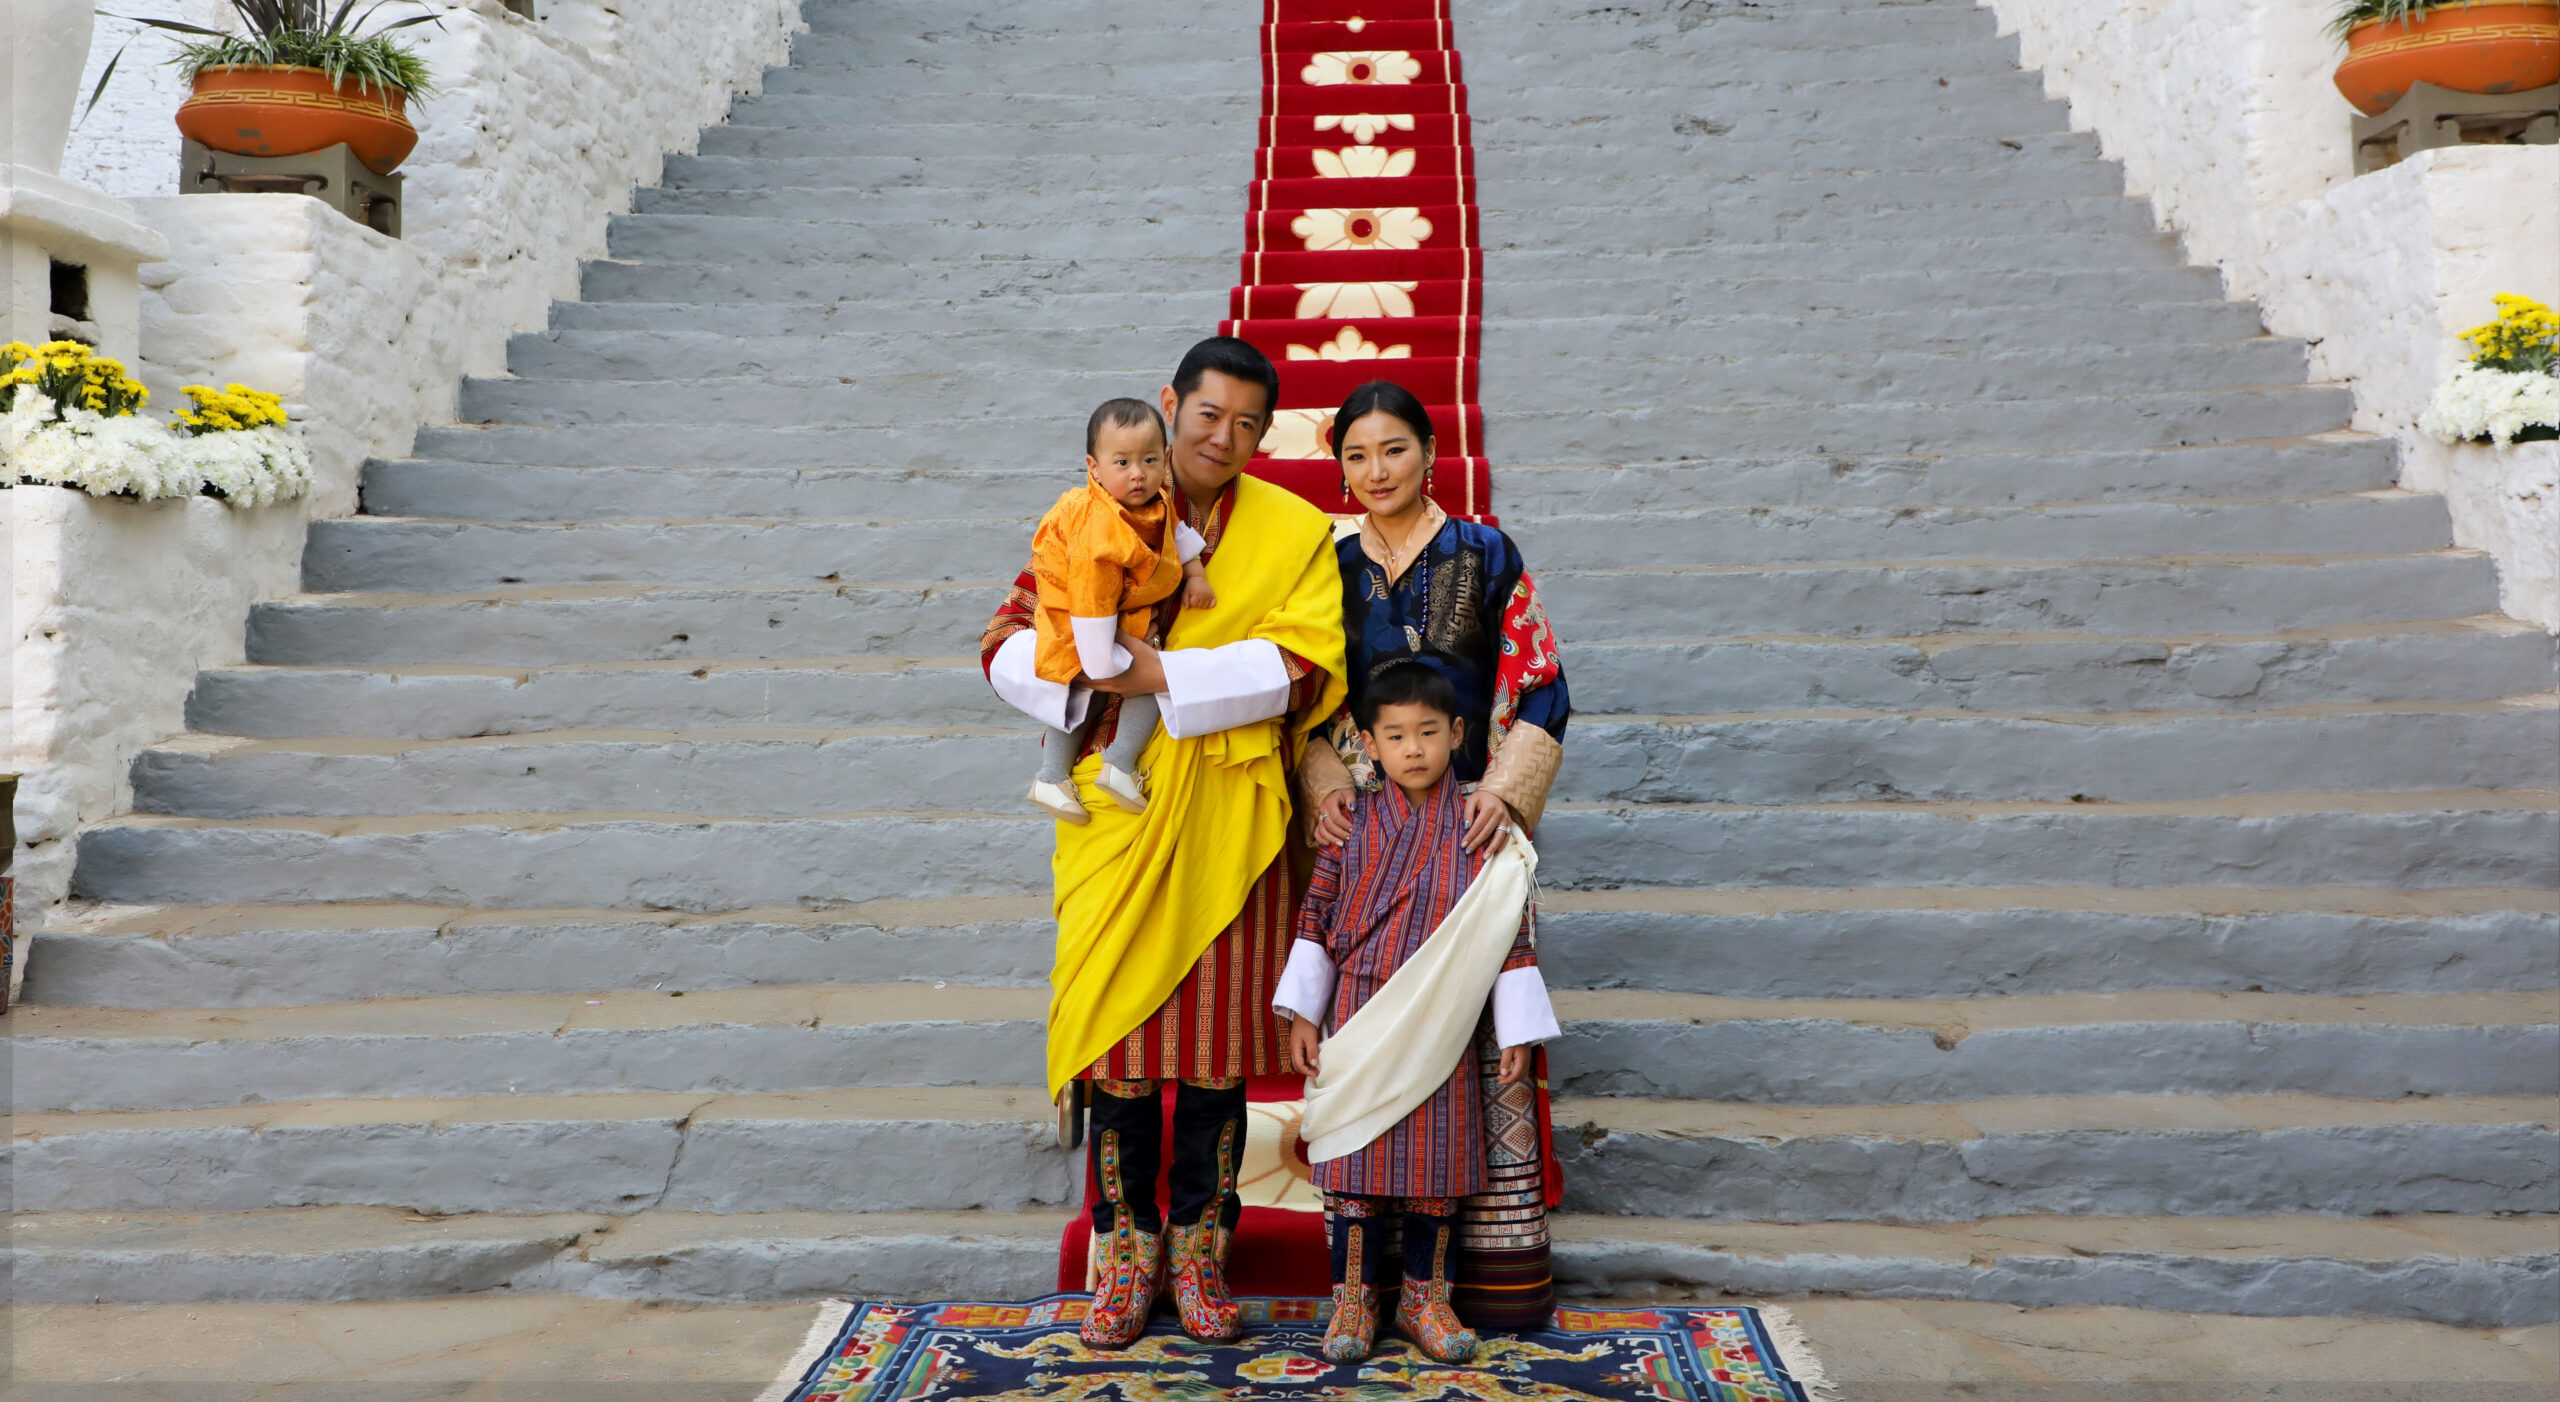 best time to visit bhutan with family